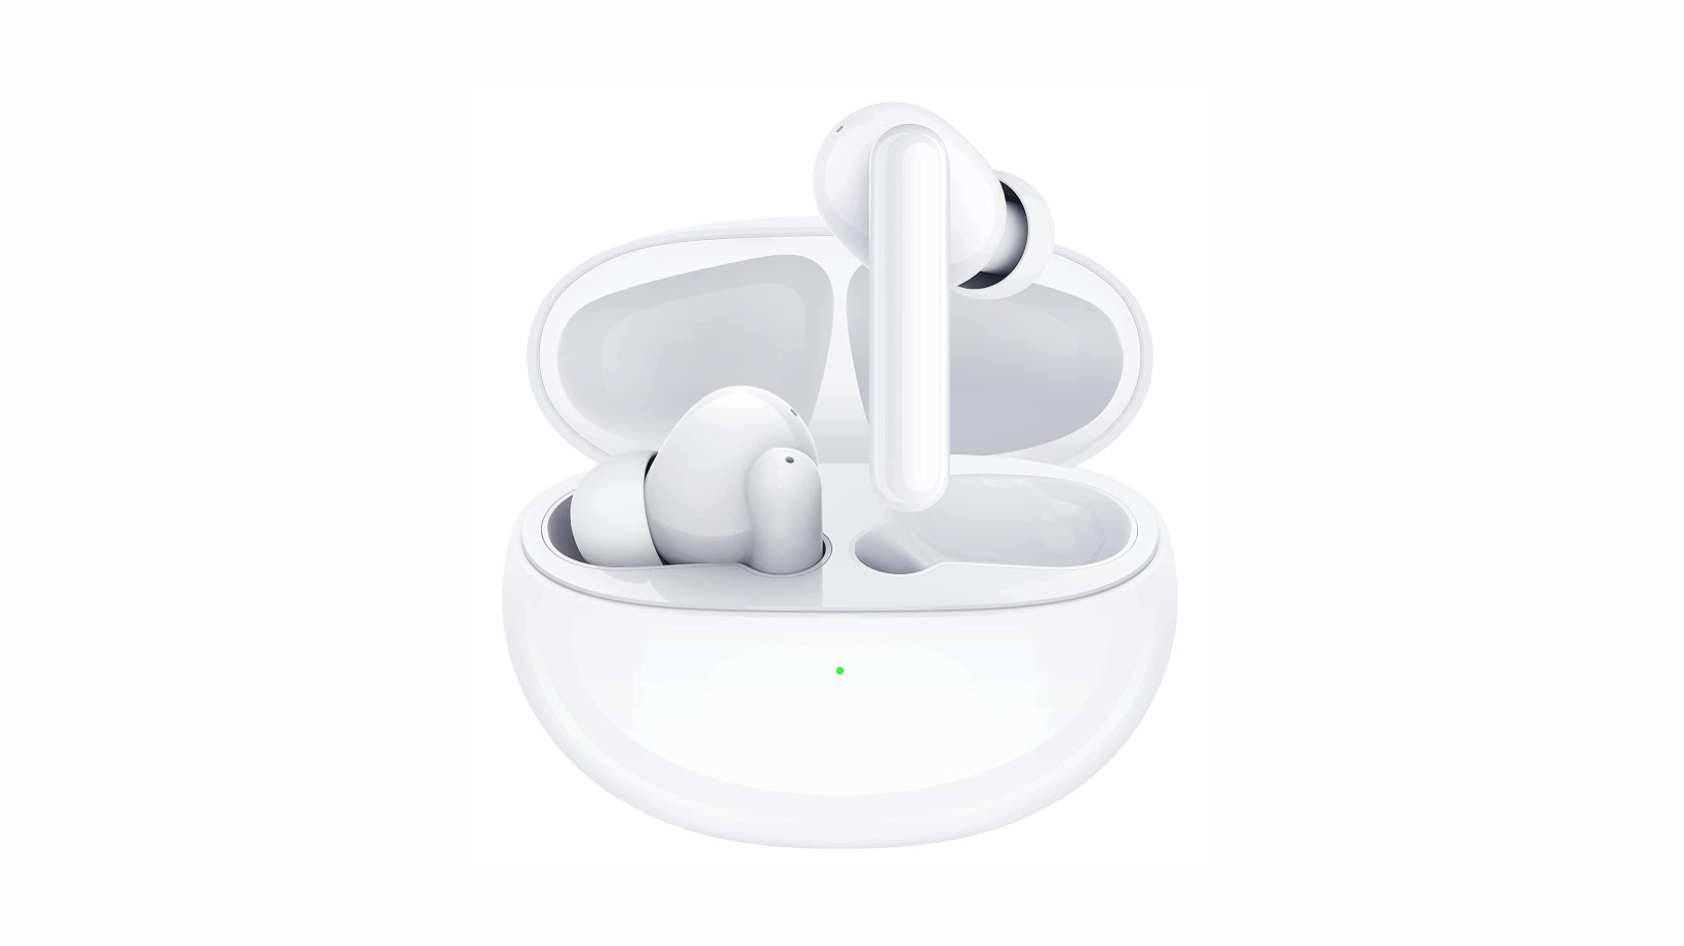 Image showing TCL MOVEAUDIO S600 earbuds in an open case, on a white background